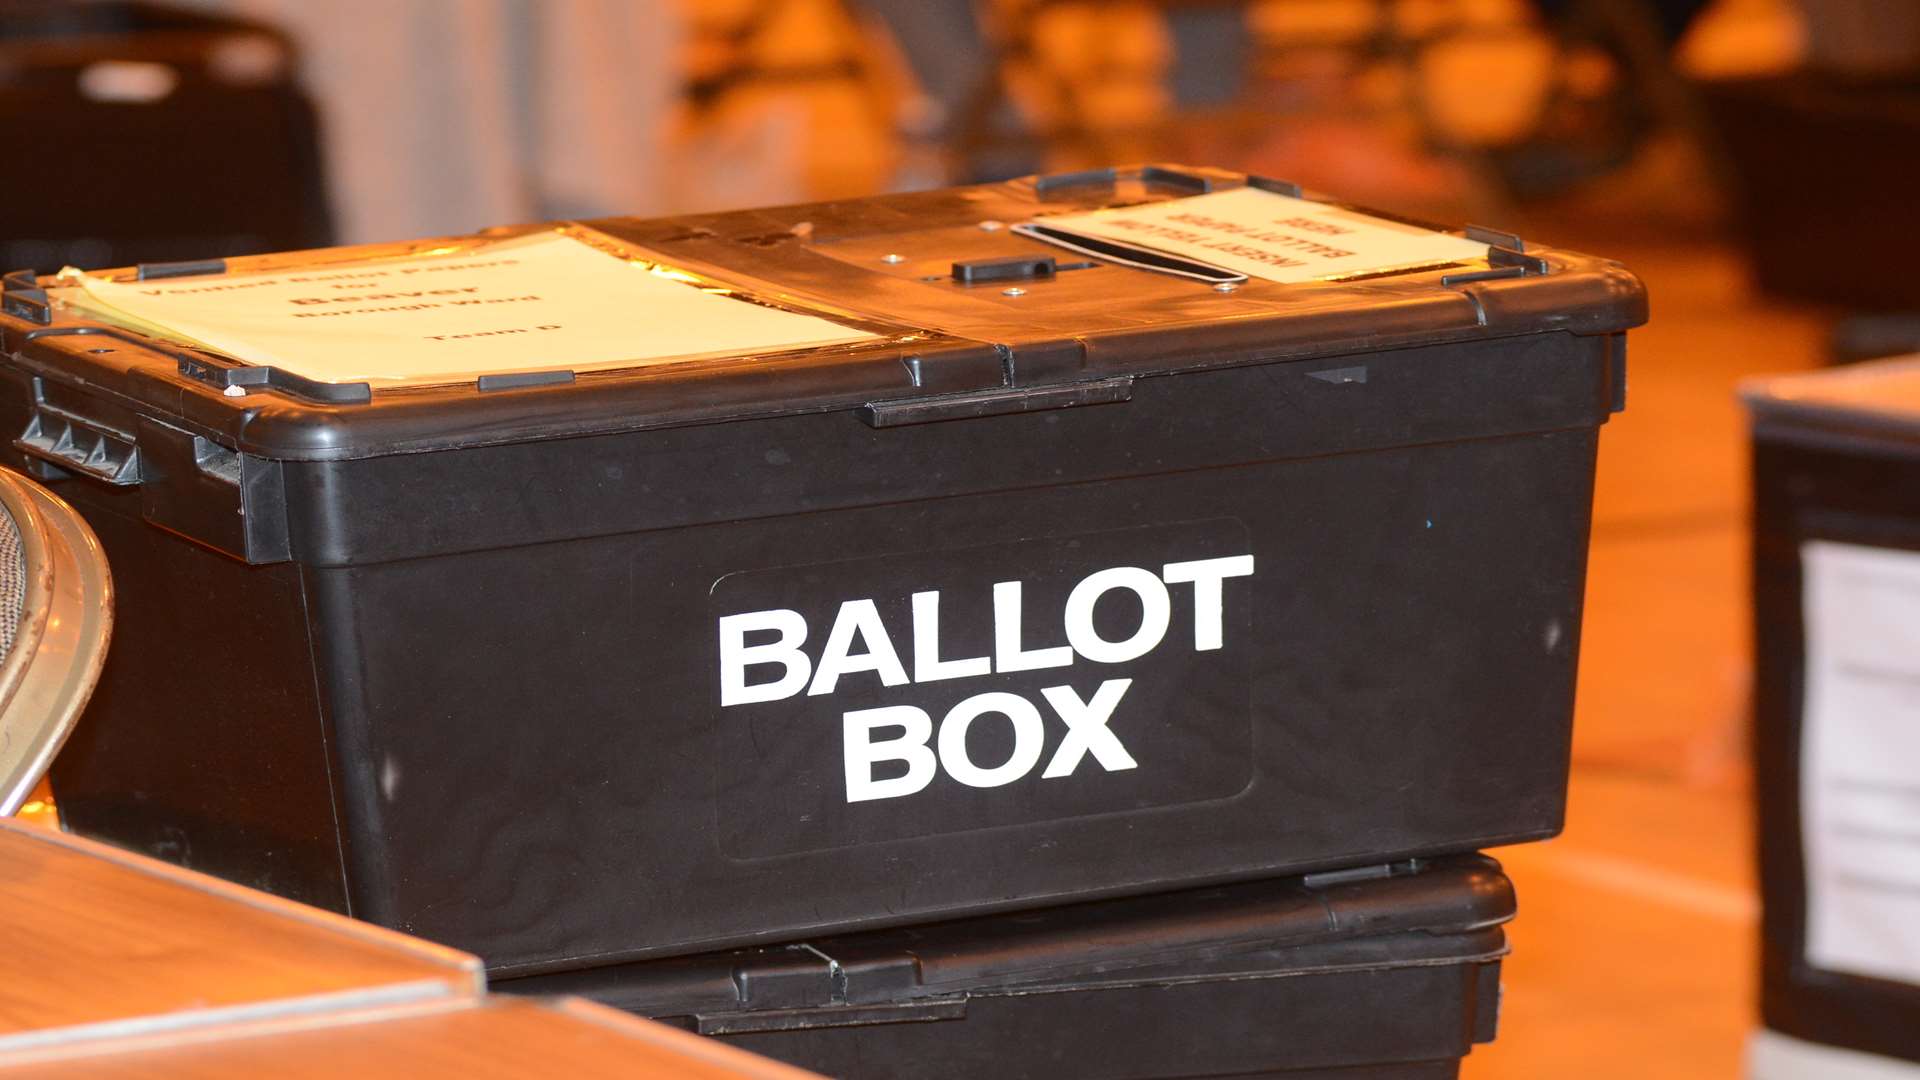 Counting was due to start again in Ashford this afternoon